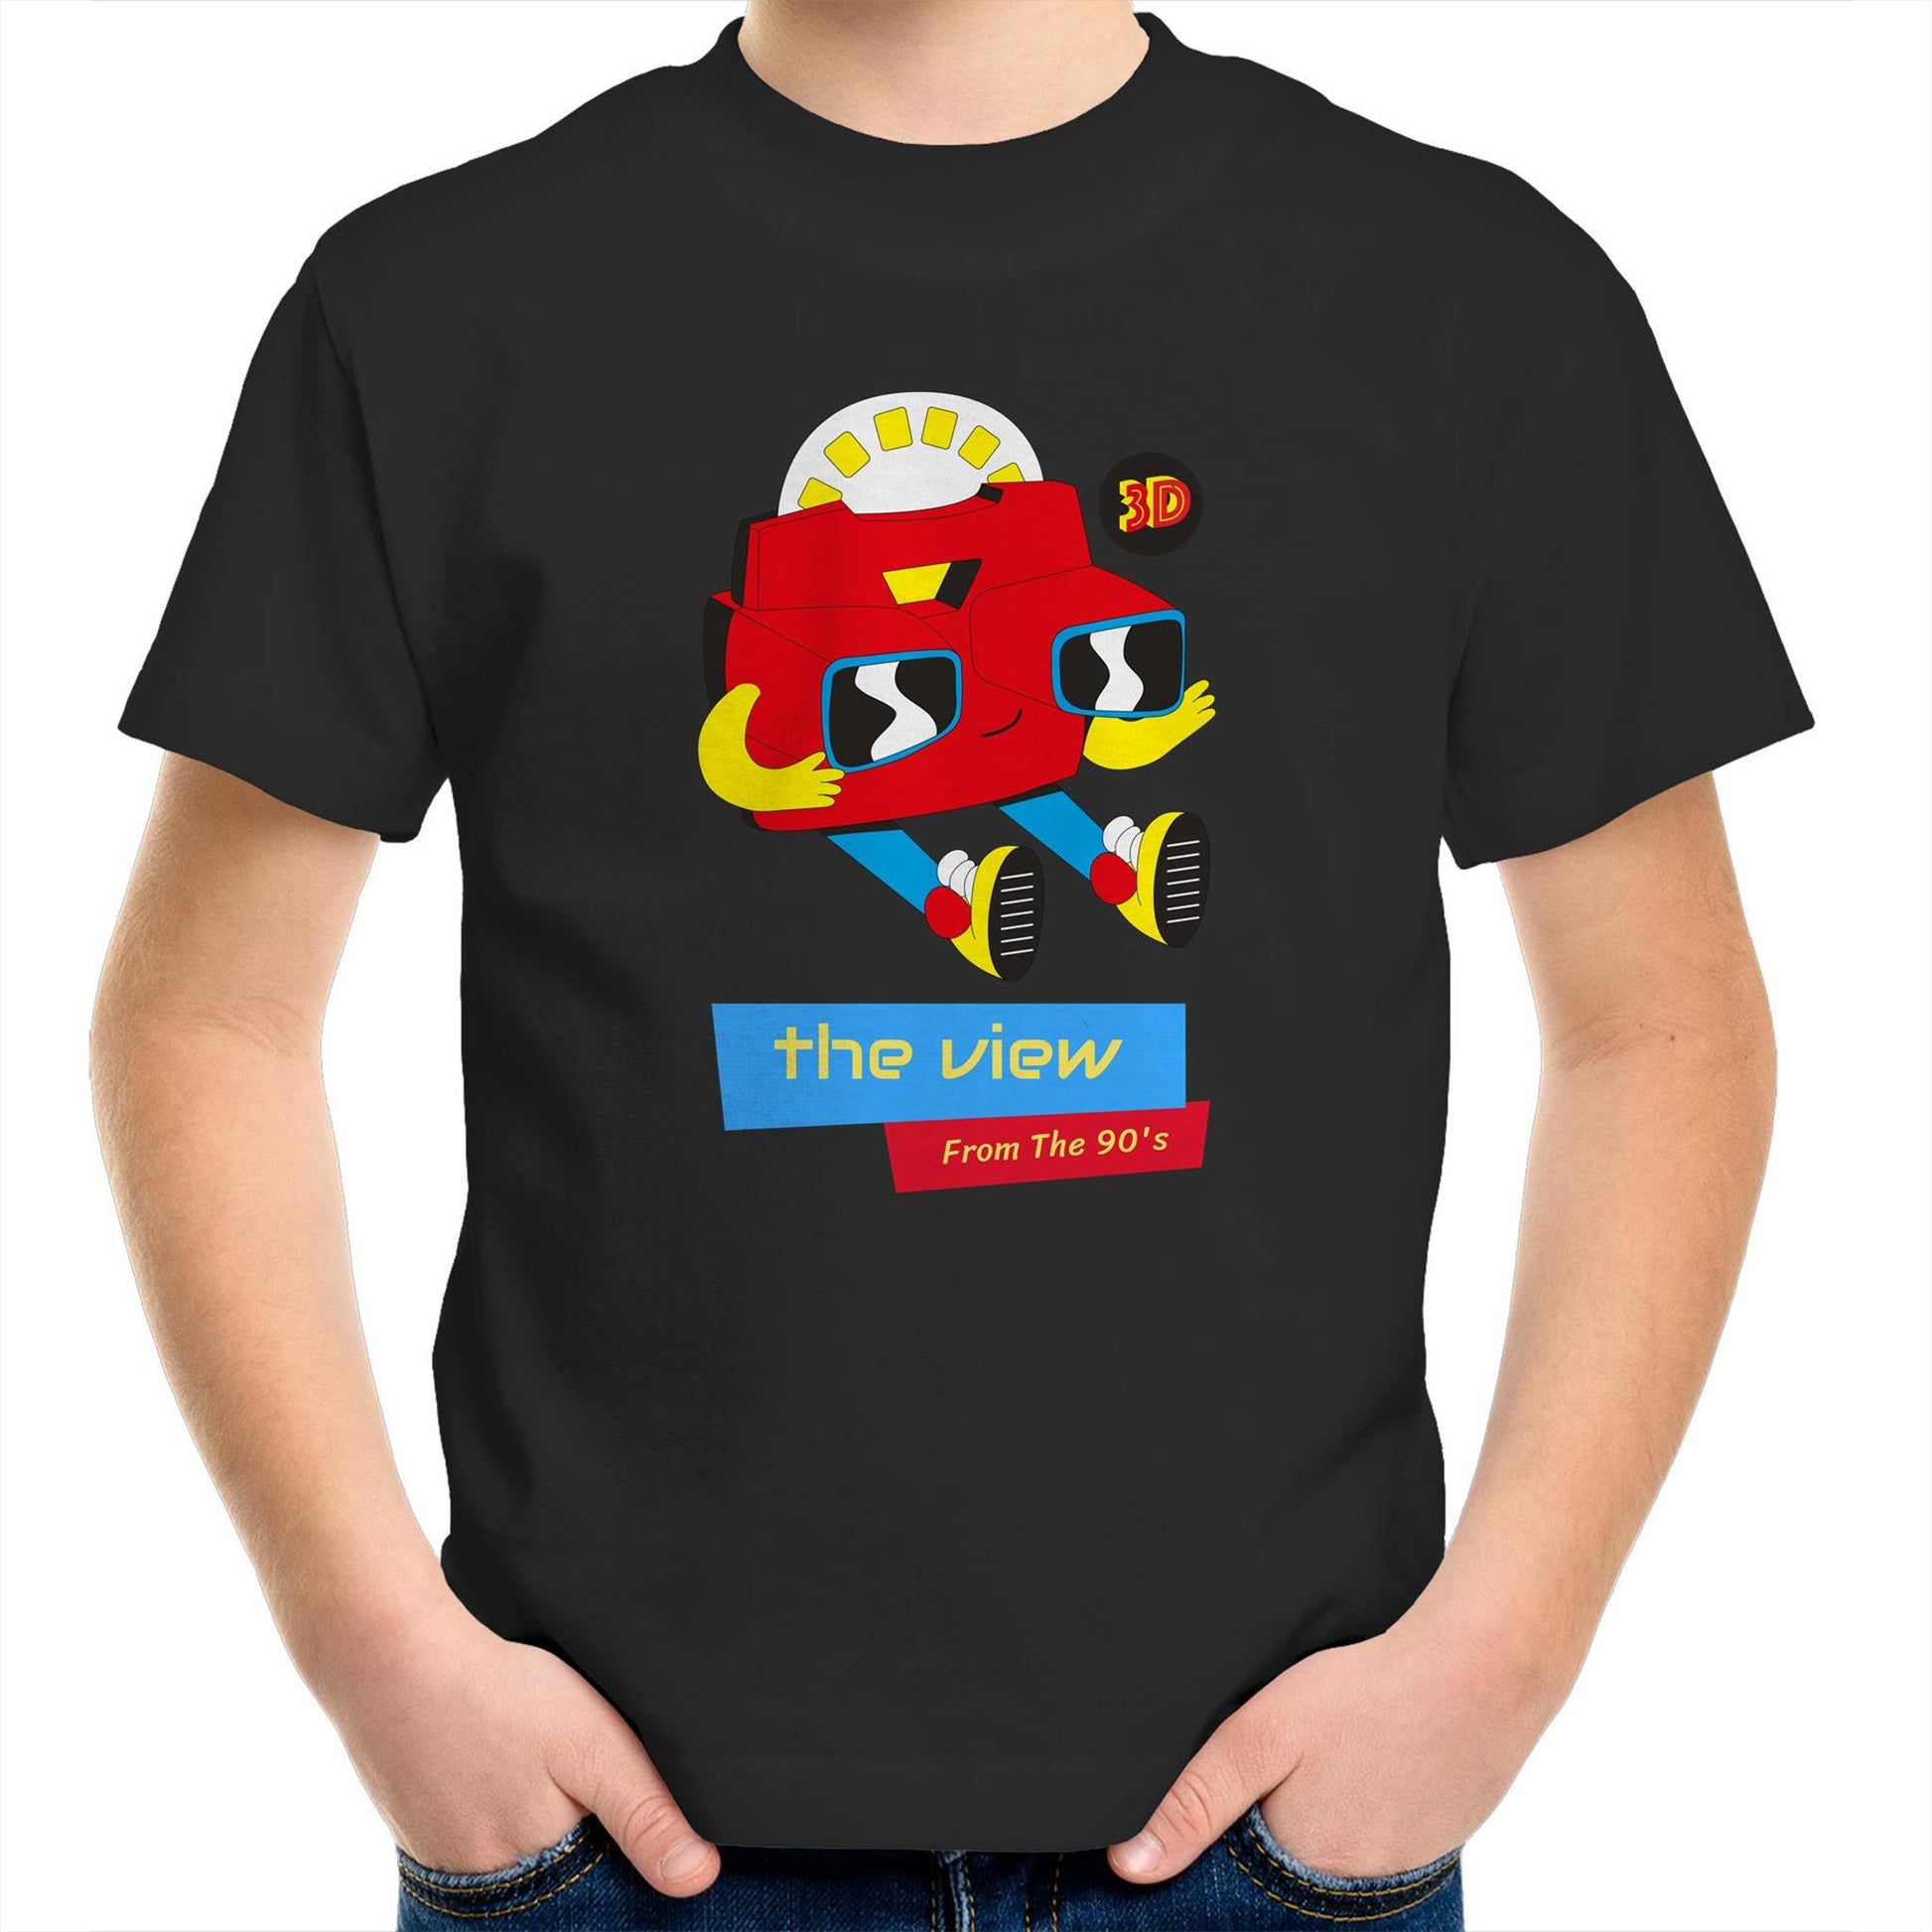 The View From The 90's - Kids Youth Crew T-Shirt Black Kids Youth T-shirt Retro